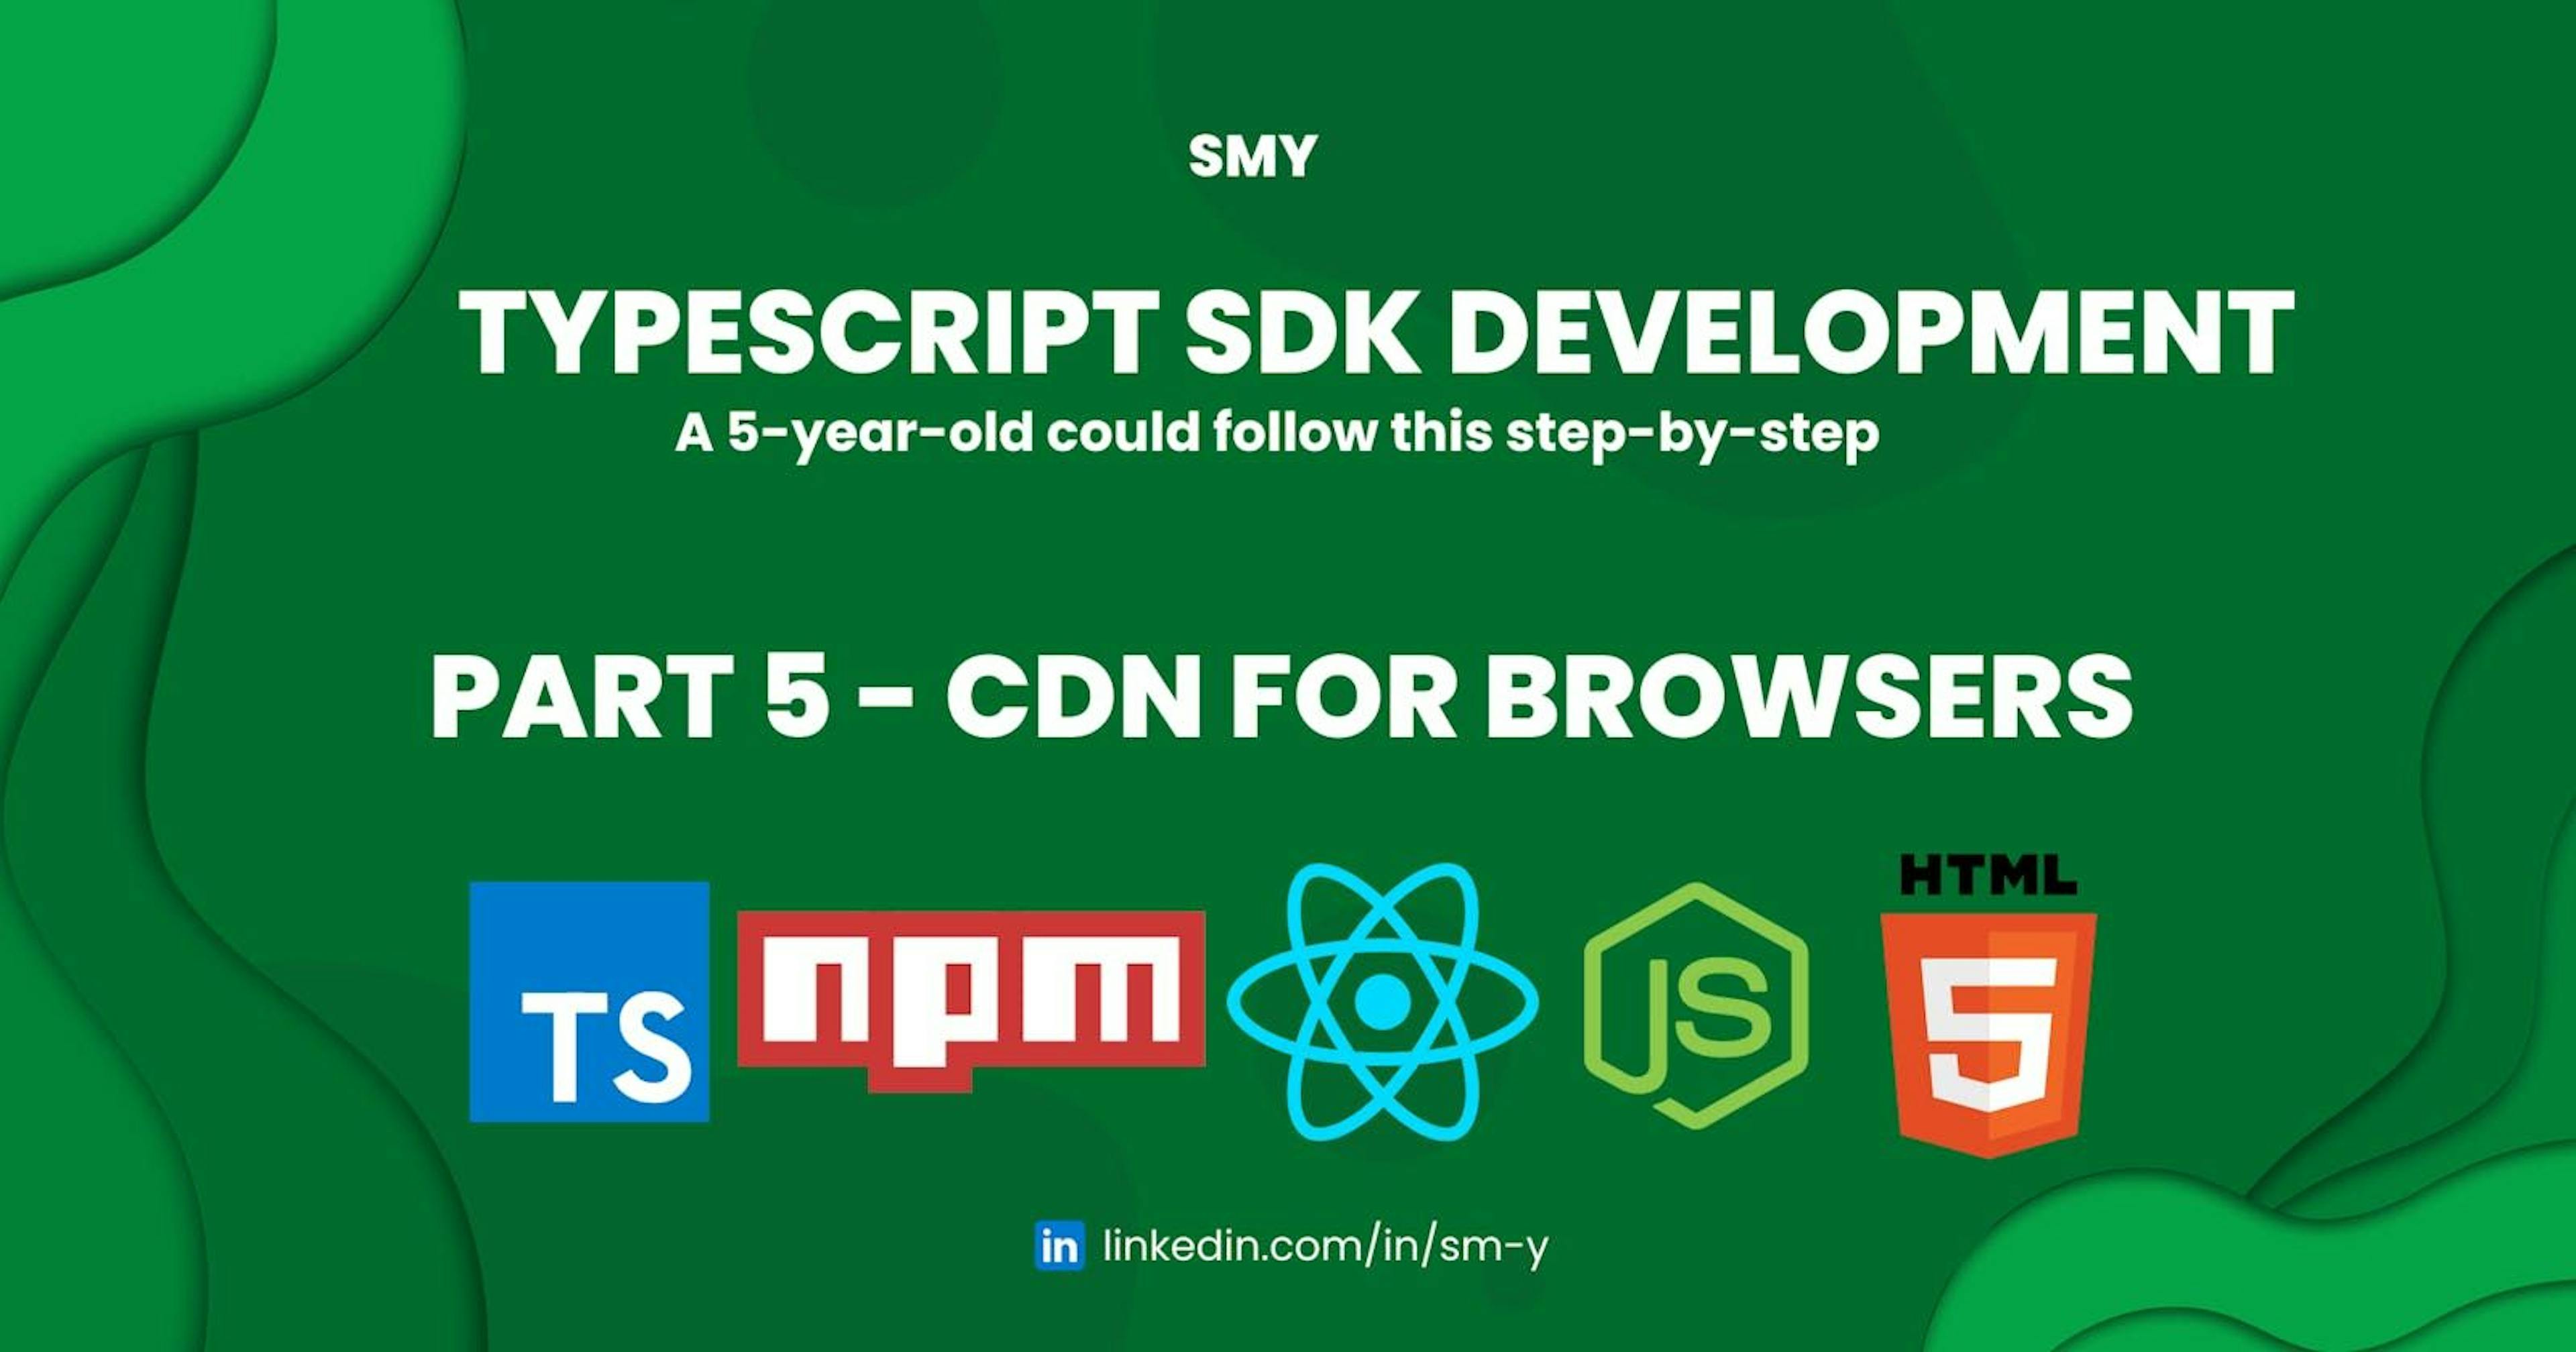 /a-5-year-old-could-follow-this-typescript-sdk-development-guide-part-5-cdn-for-browsers feature image